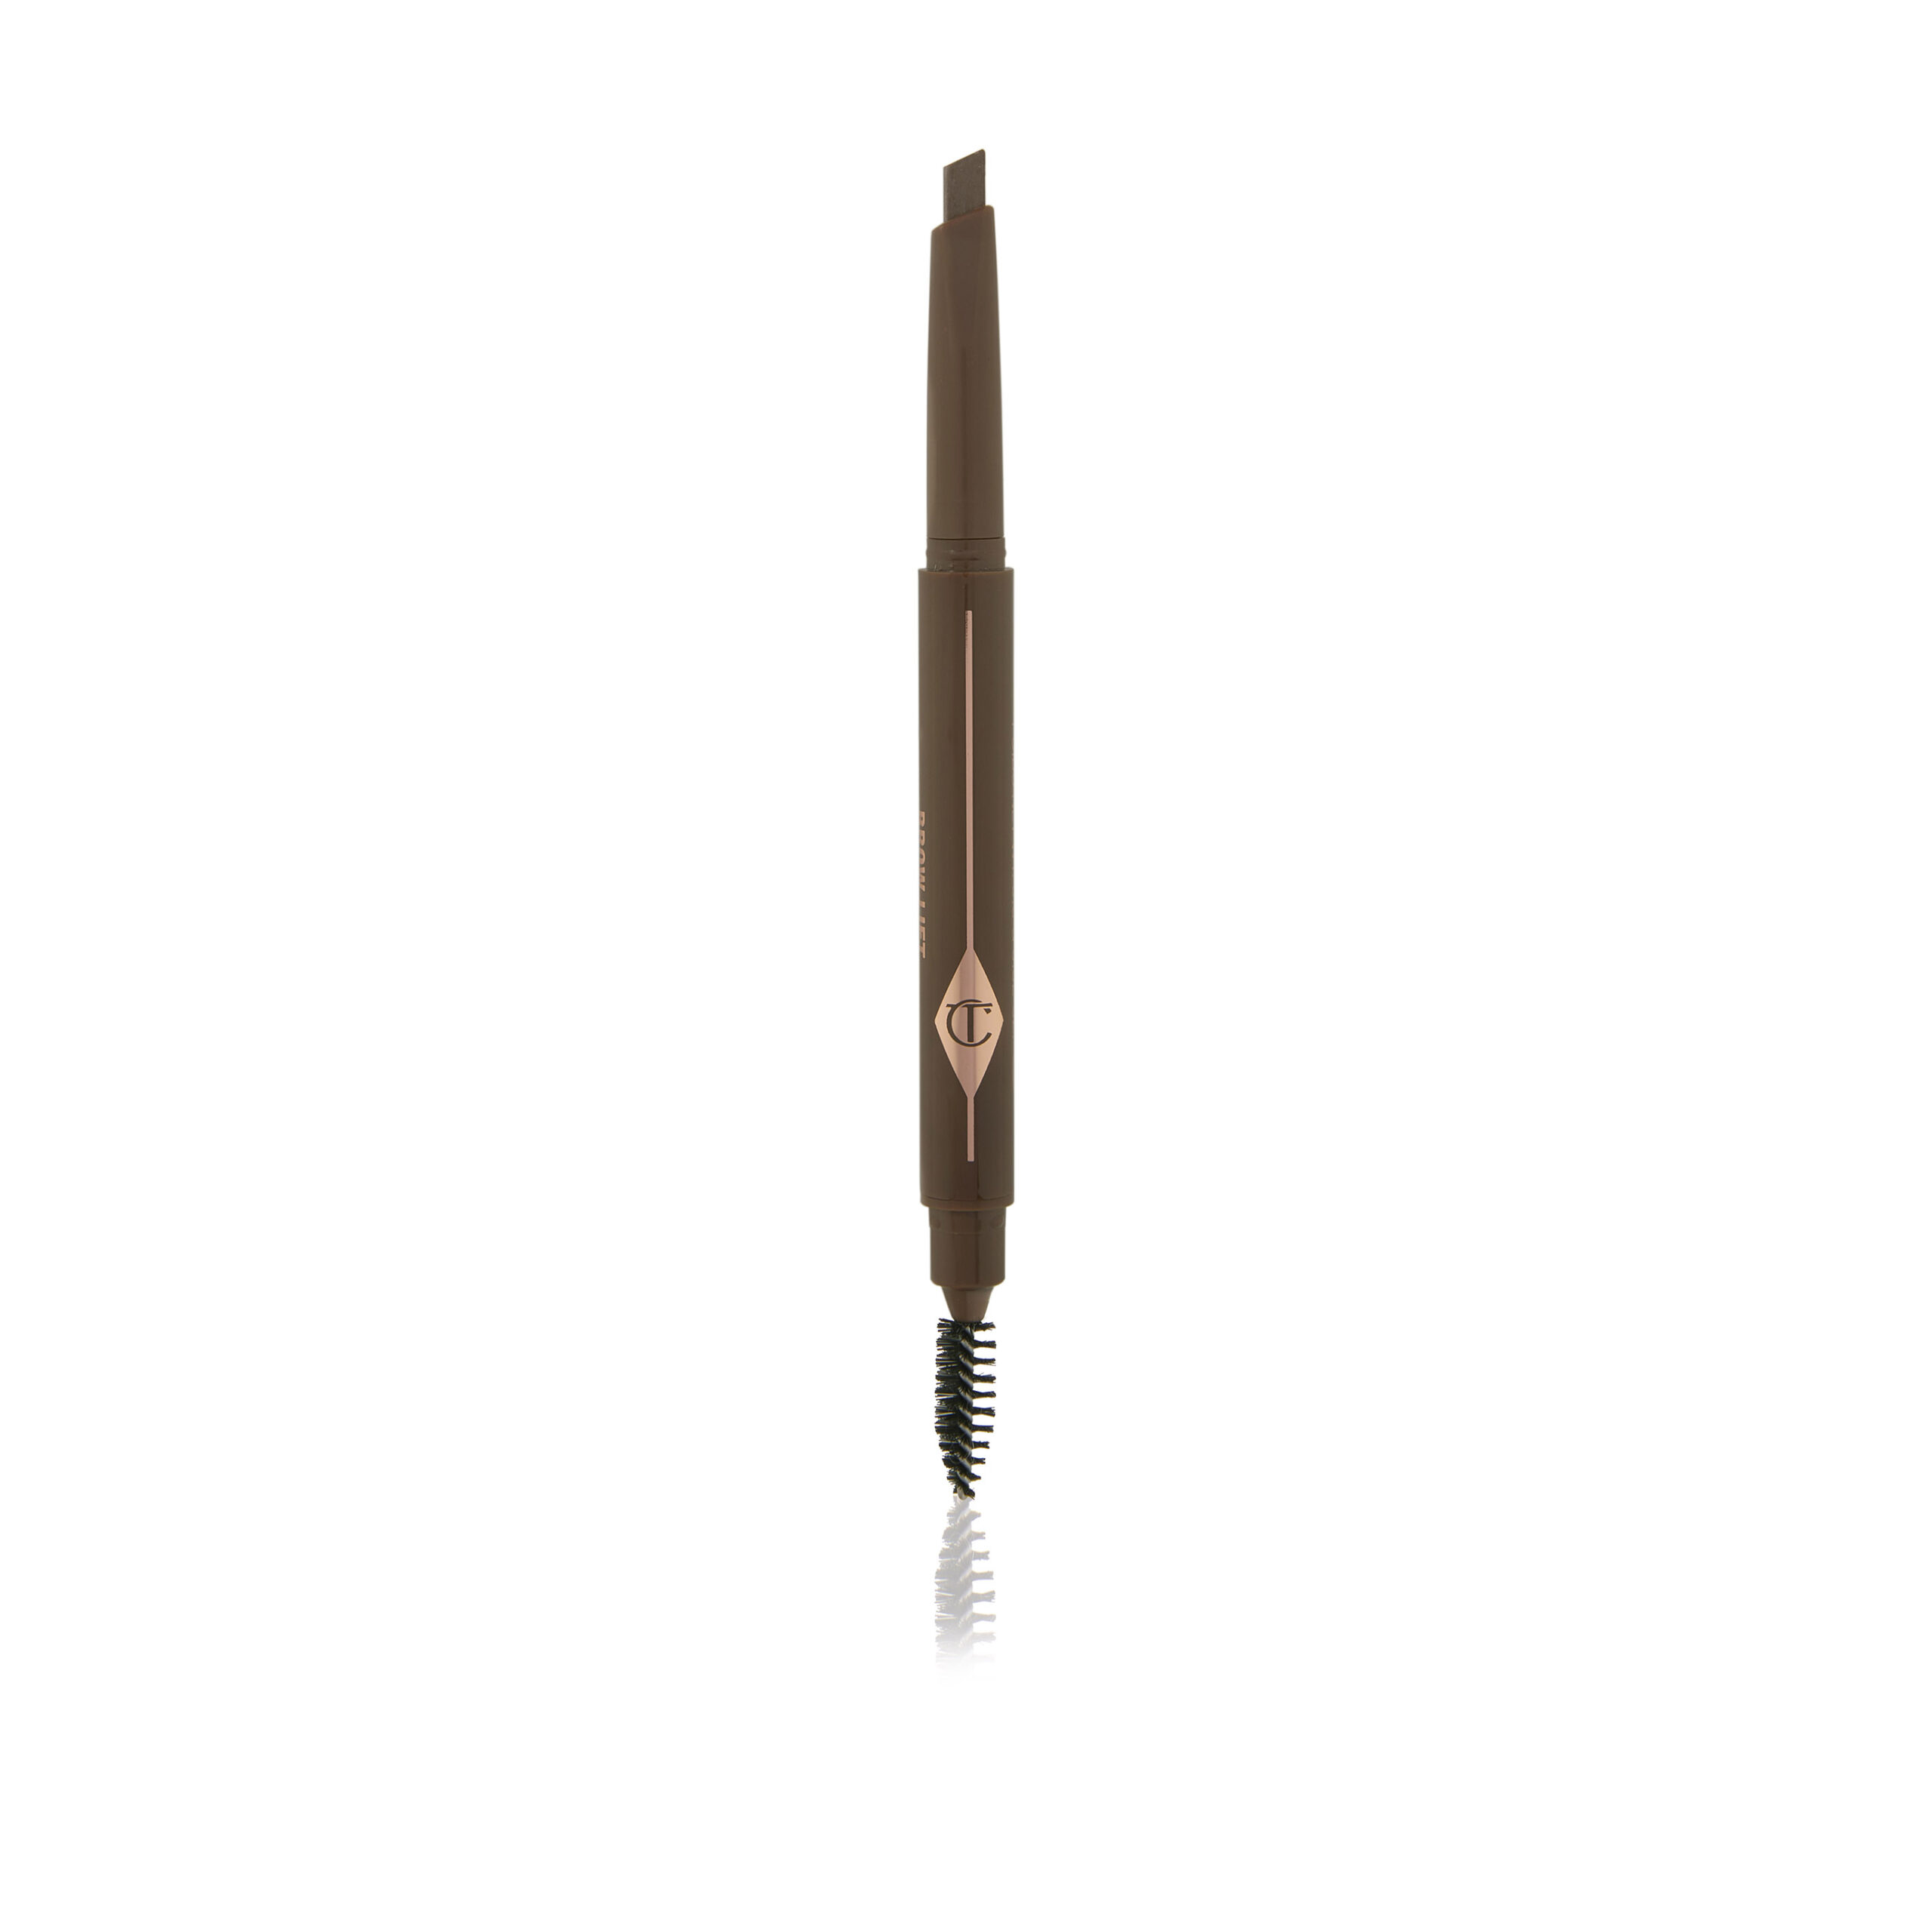 Charlotte Tilbury Brow Lift for best eye products for women over 60.